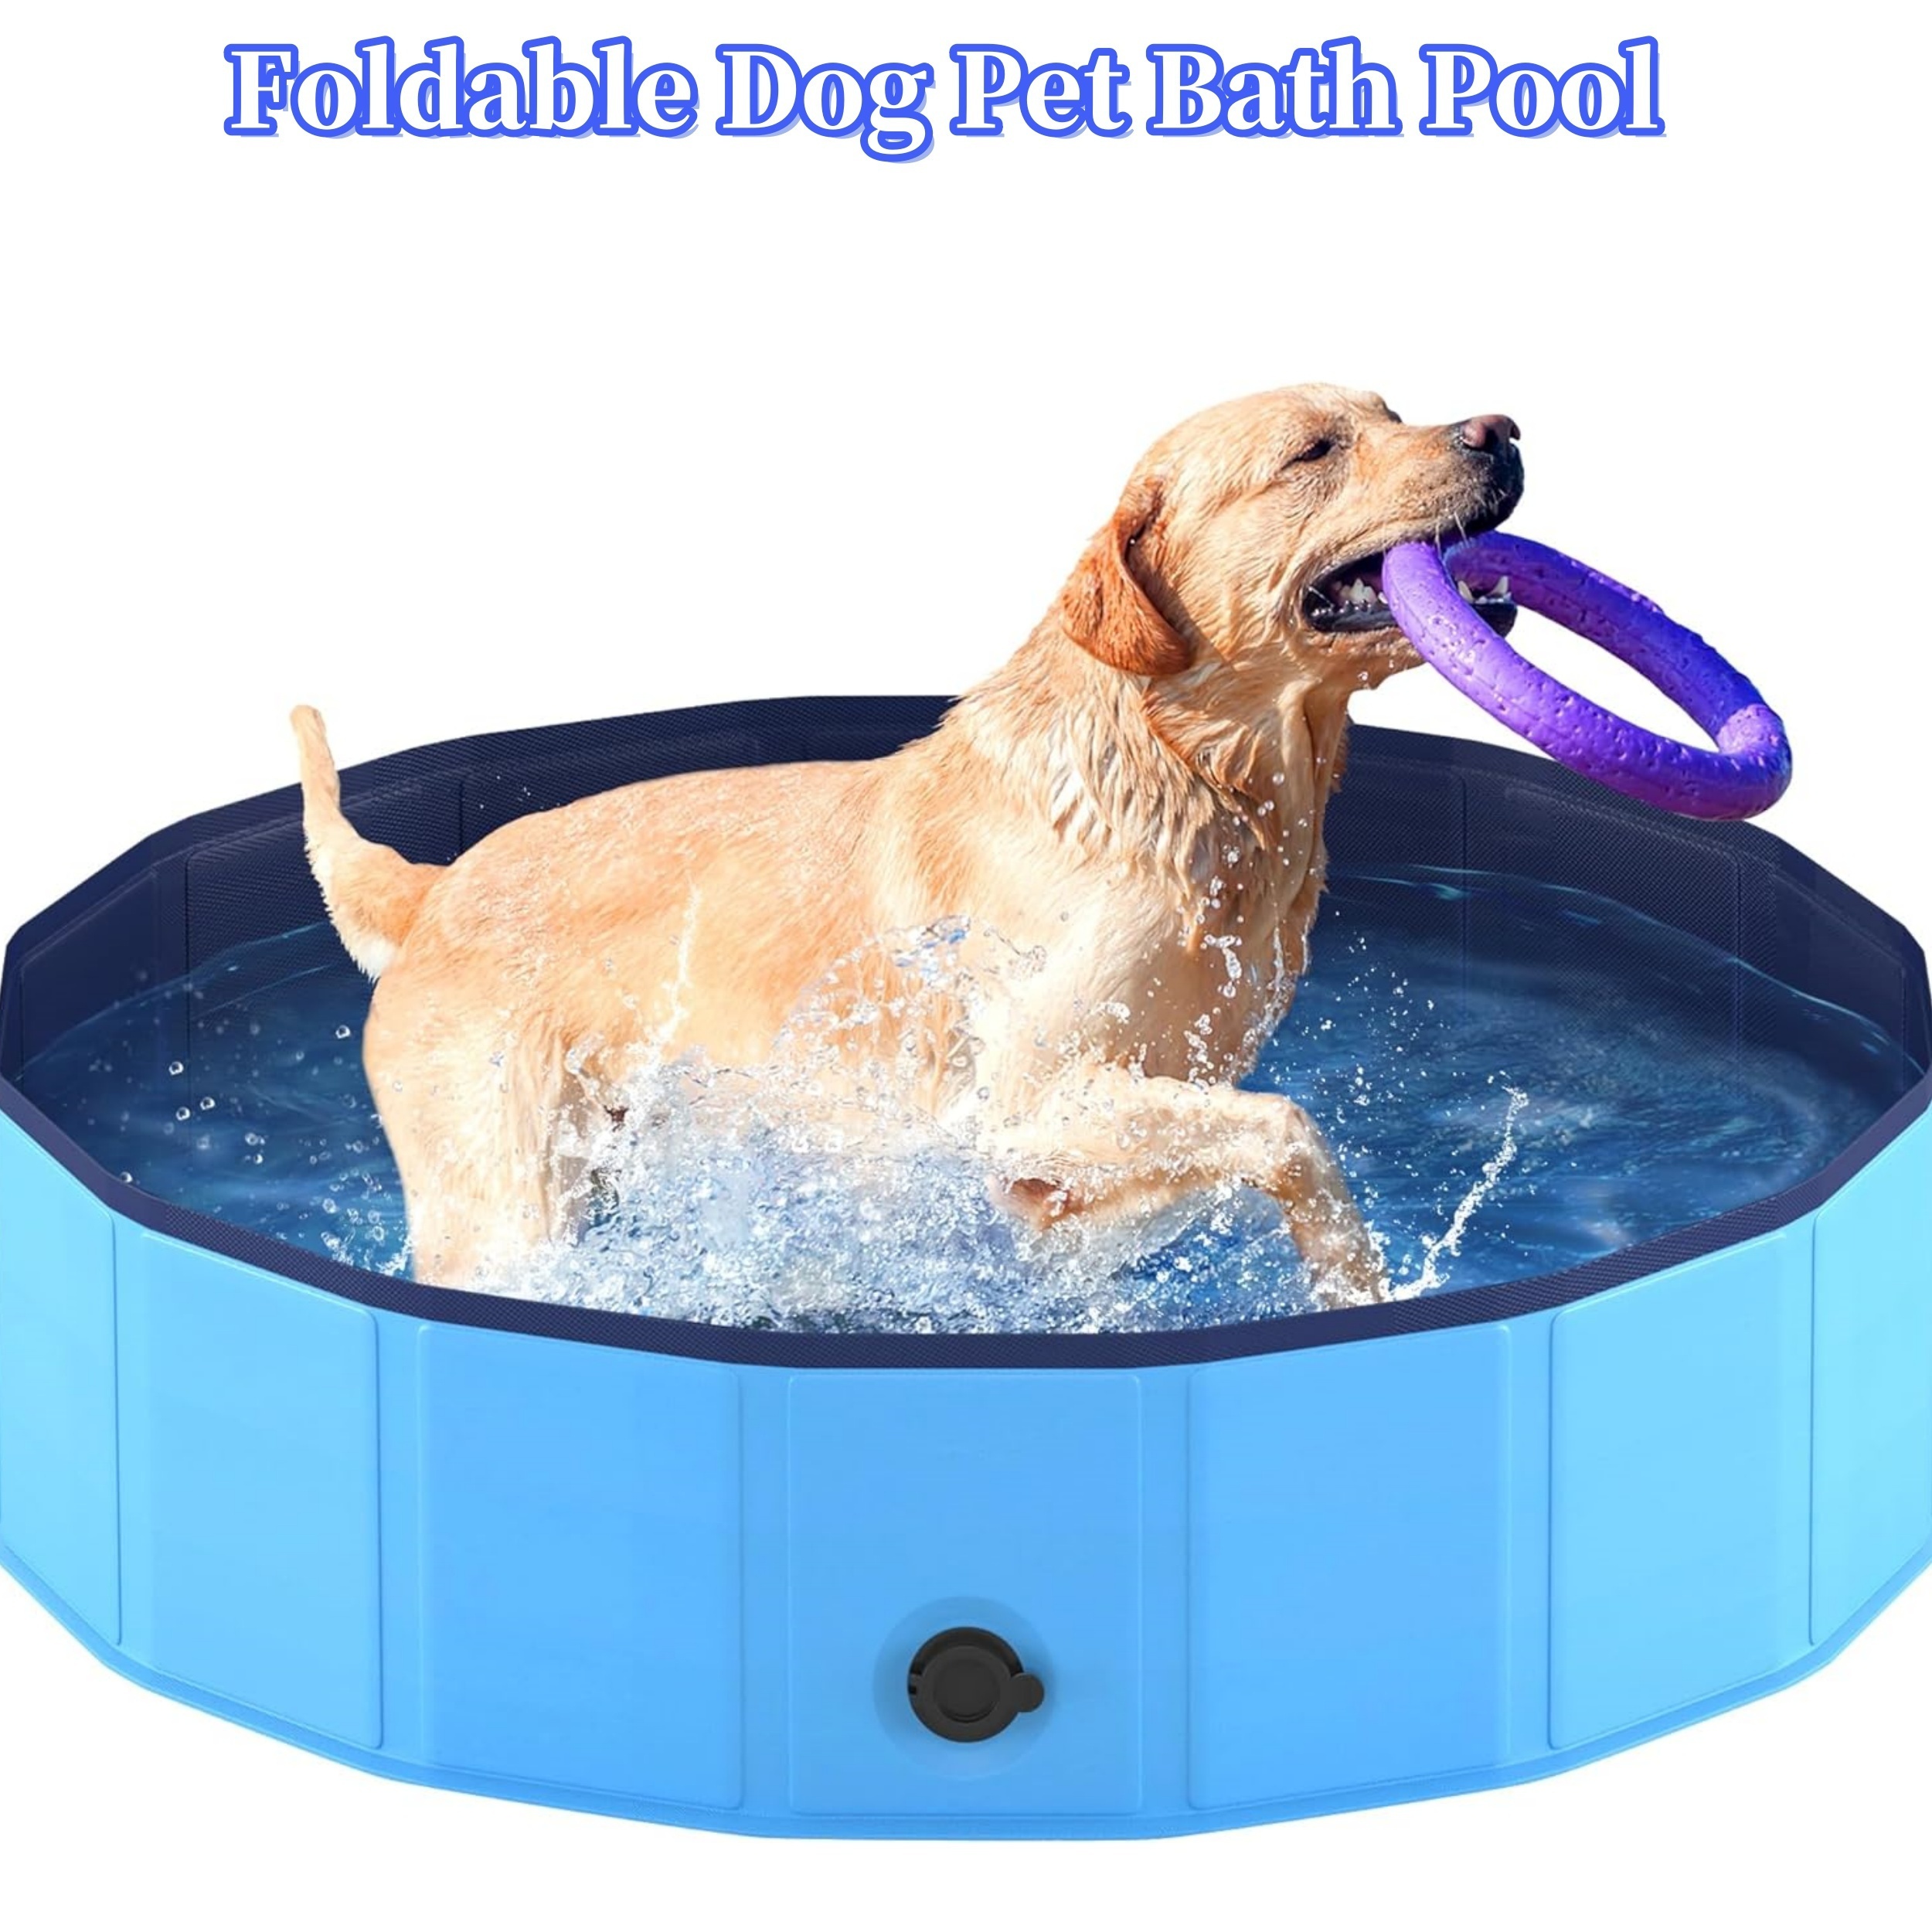 

Foldable Dog Pet Bath Pool Collapsible Dog Pet Pool Bathing Tub Kiddie Pool Doggie Wading Pool For Puppy Small Medium Large Dogs Cats And Kids